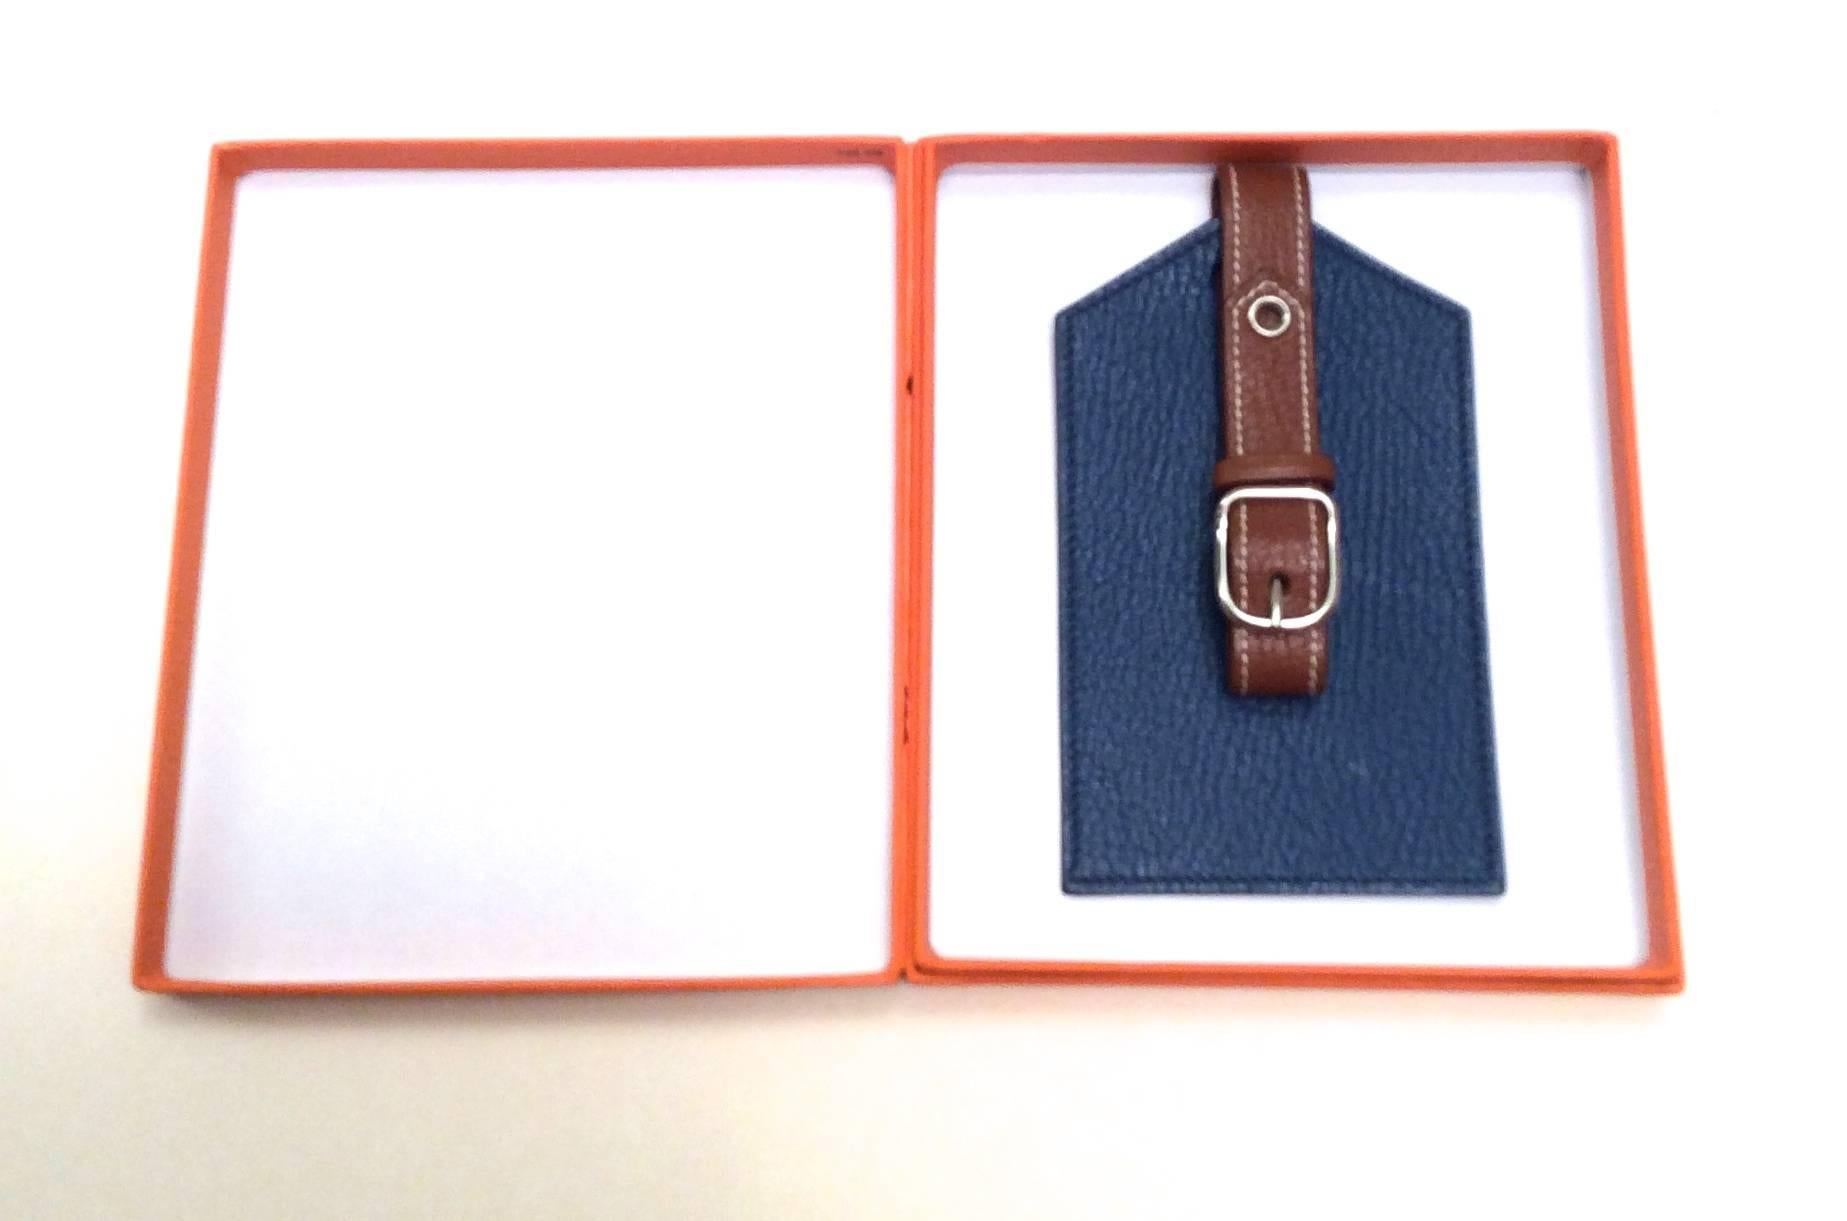 This Hermes luggage tag / bag charm is new and is a blue tag with a brown strap. It is a remarkable addition to any personal luggage collection or handbag collection. Tag has a silver buckle for opening and closing the strap.

Dimensions of